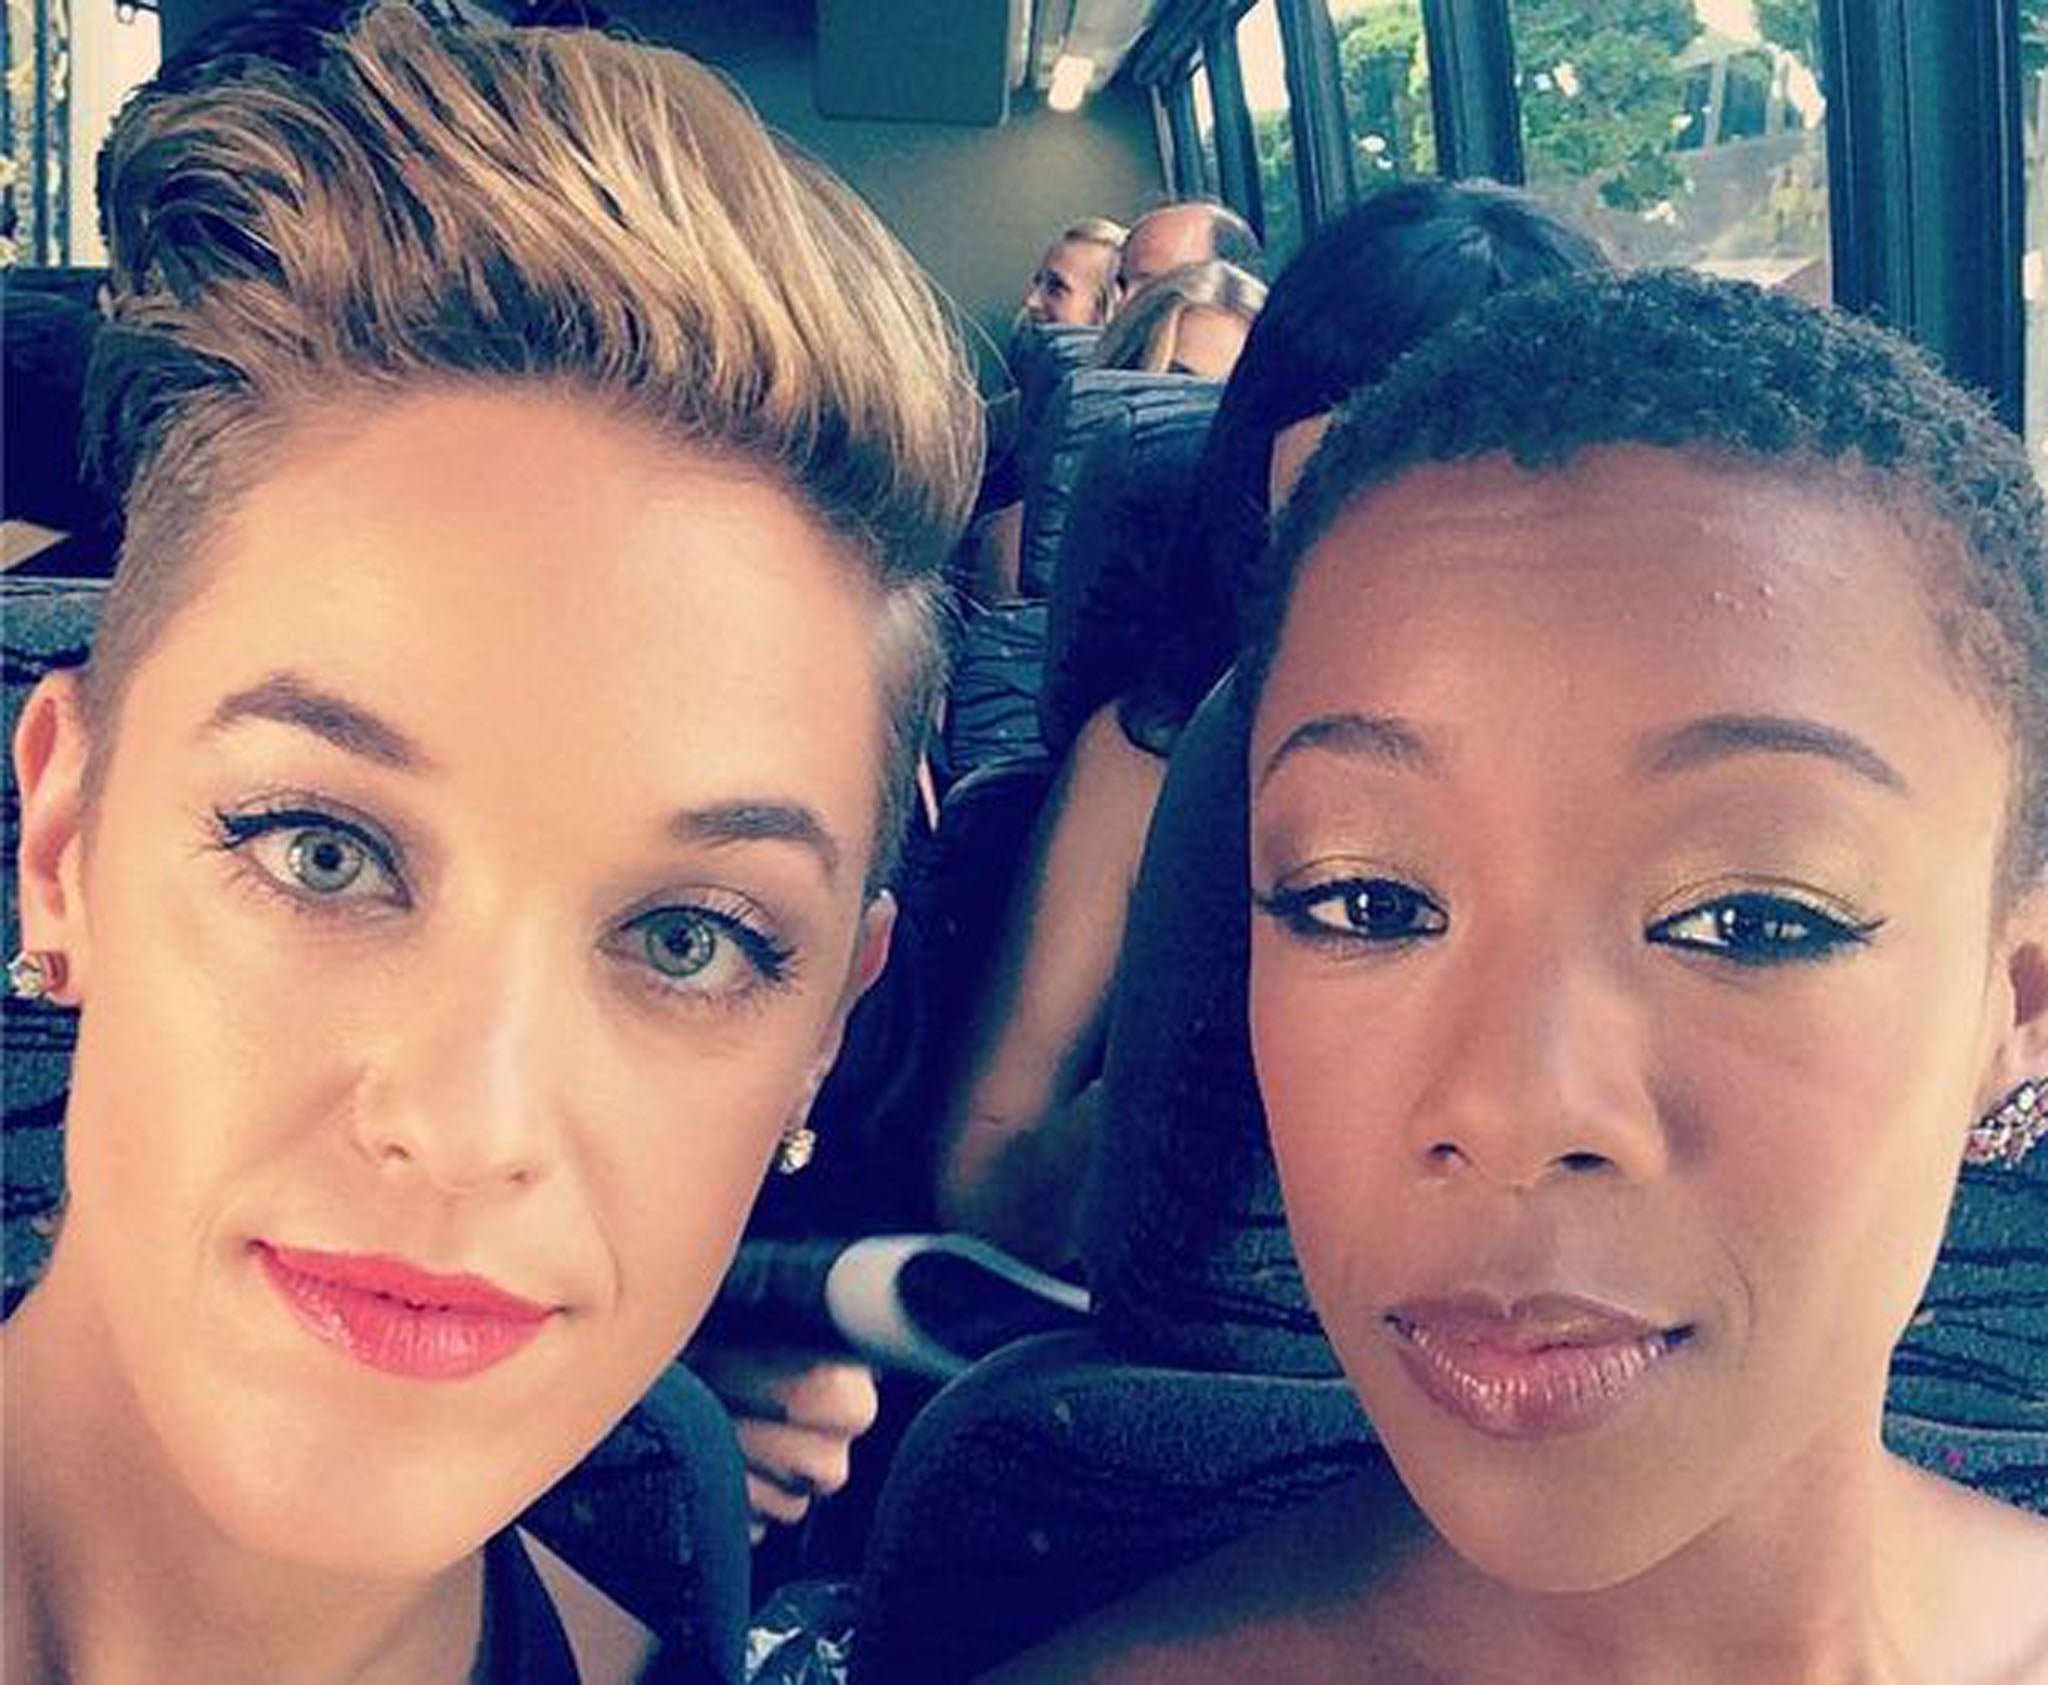 Lauren Morelli and Samira Wiley made their first public appearance together at the Emmy Awards in August 2014